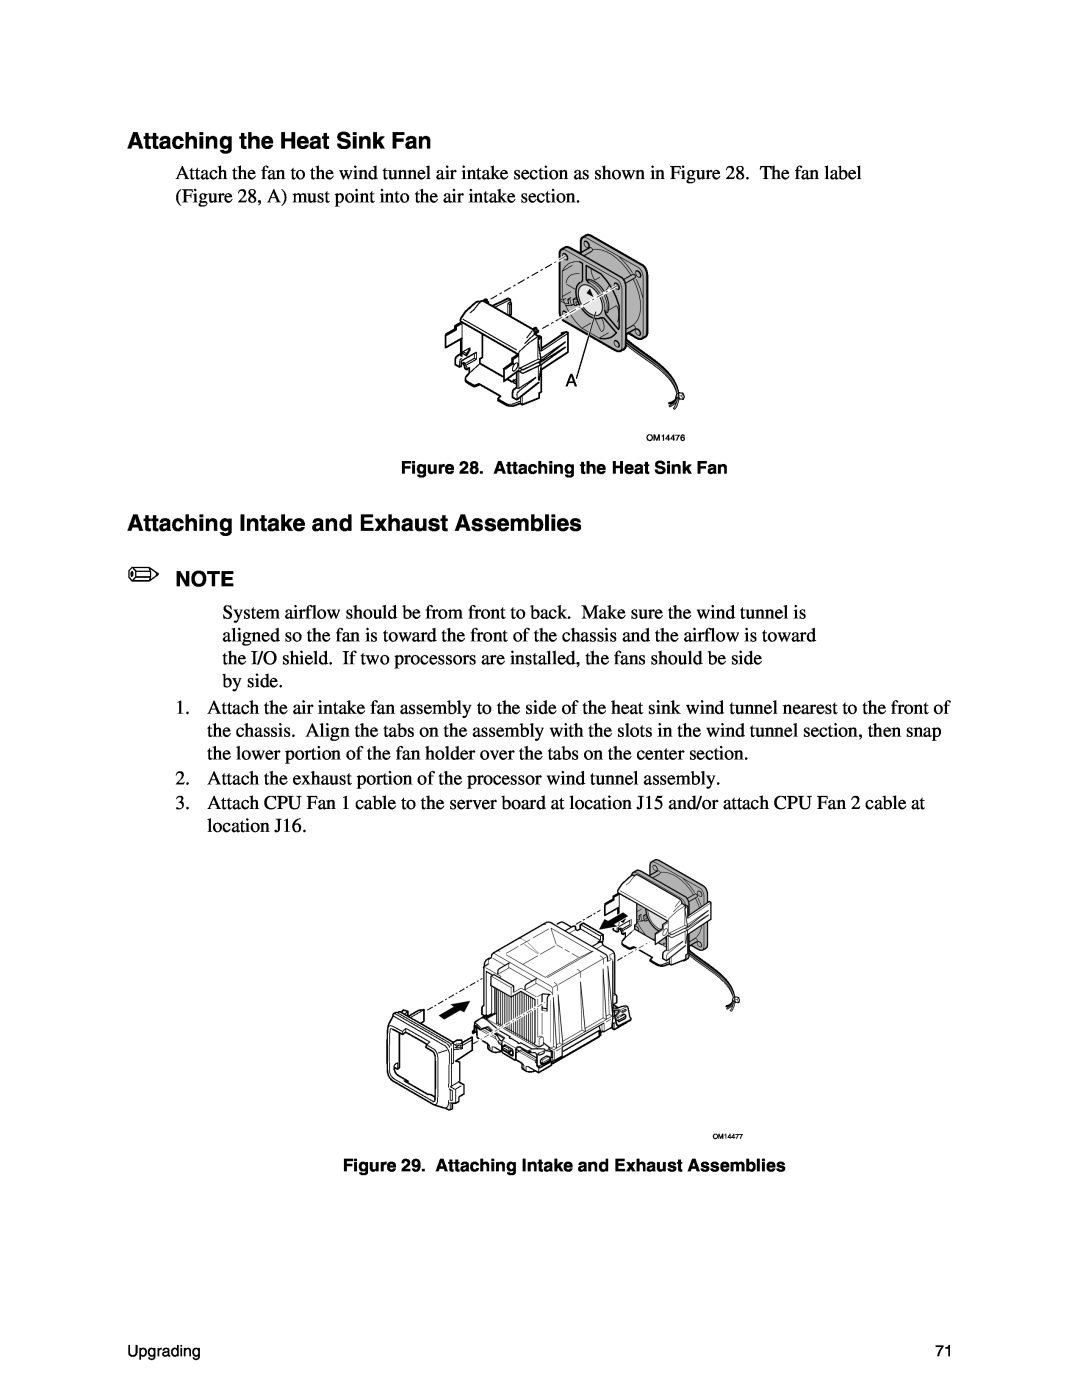 Intel SE7500CW2 manual Attaching the Heat Sink Fan, Attaching Intake and Exhaust Assemblies, by side 